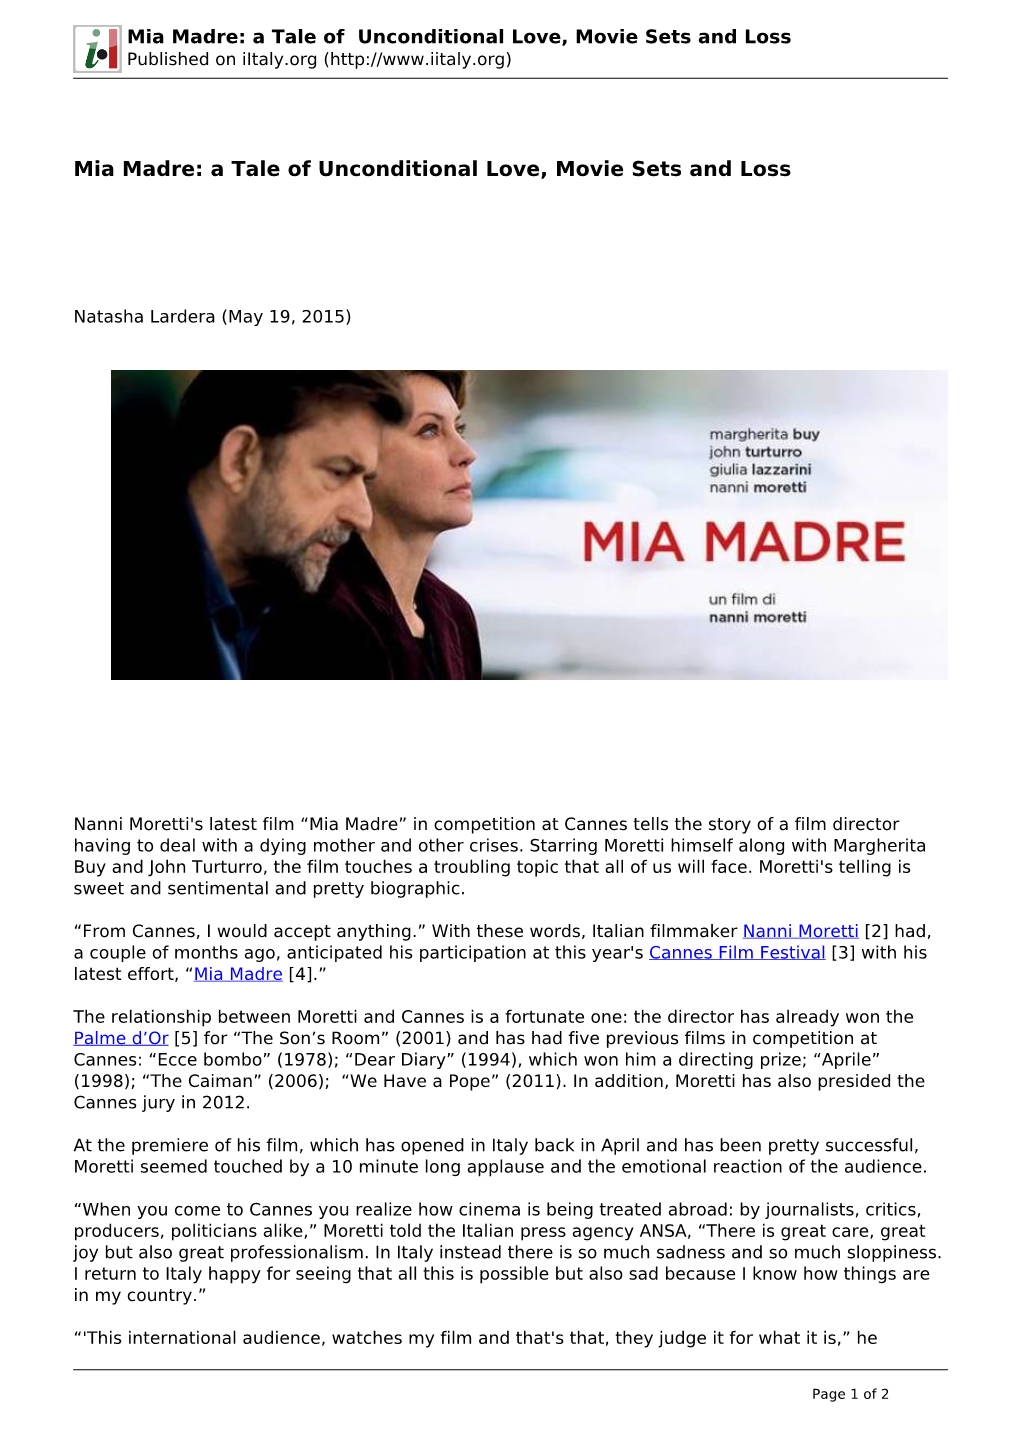 Mia Madre: a Tale of Unconditional Love, Movie Sets and Loss Published on Iitaly.Org (